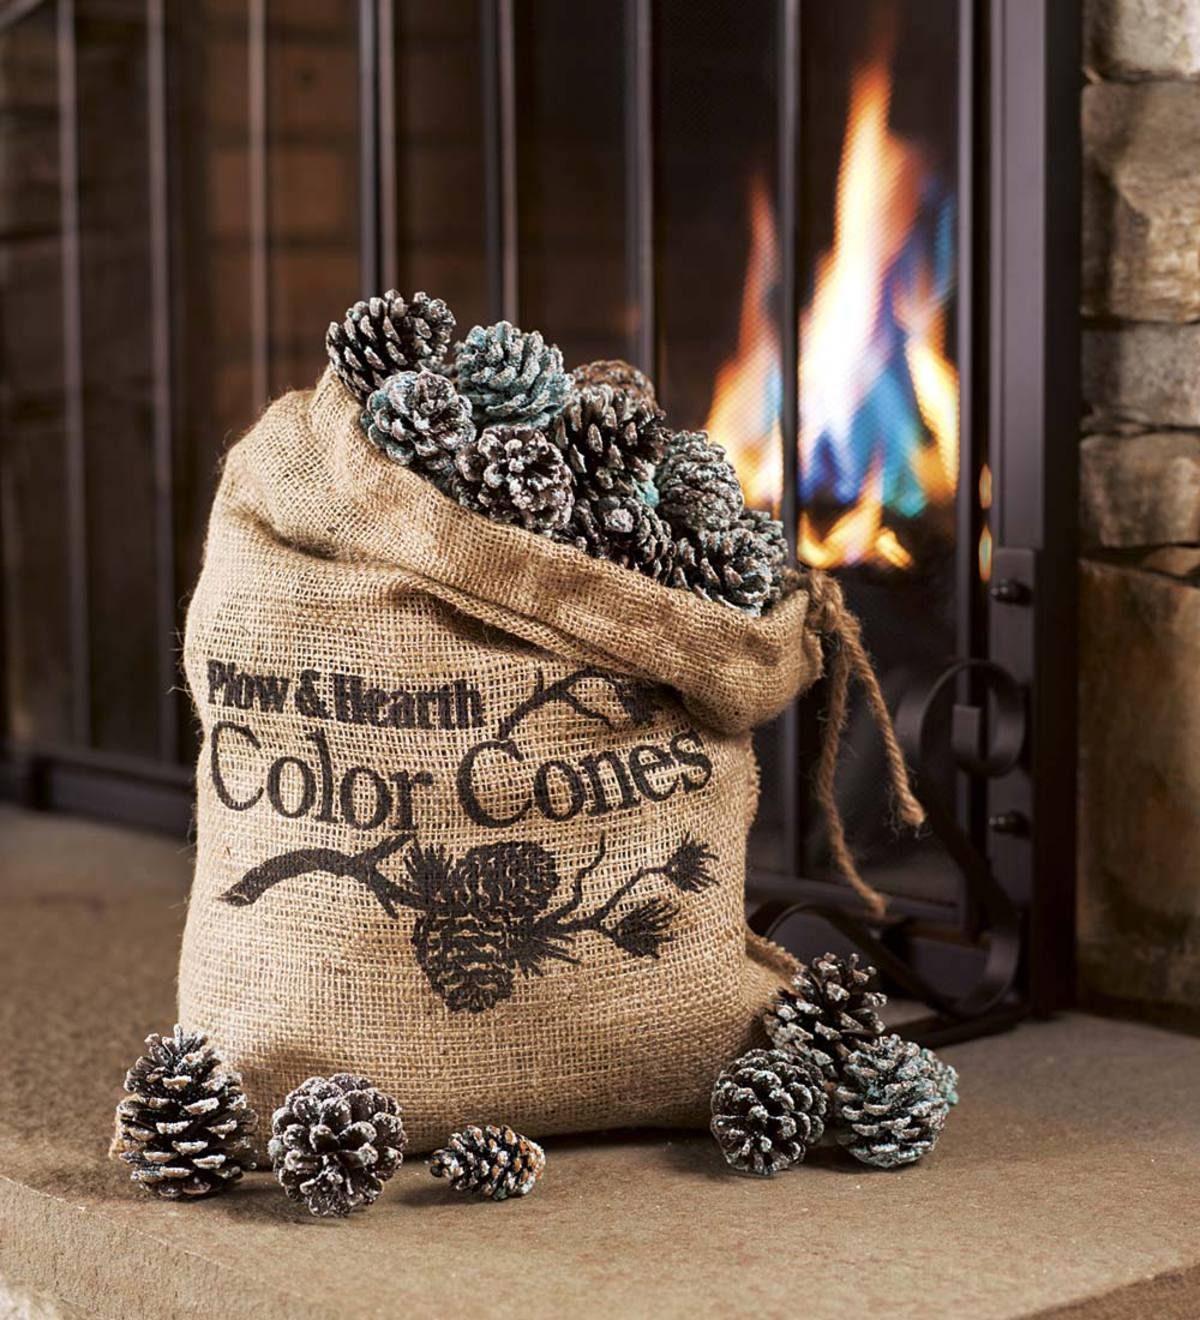 Make Your Own Color-Changing Fireplace Pinecones - Birds and Blooms